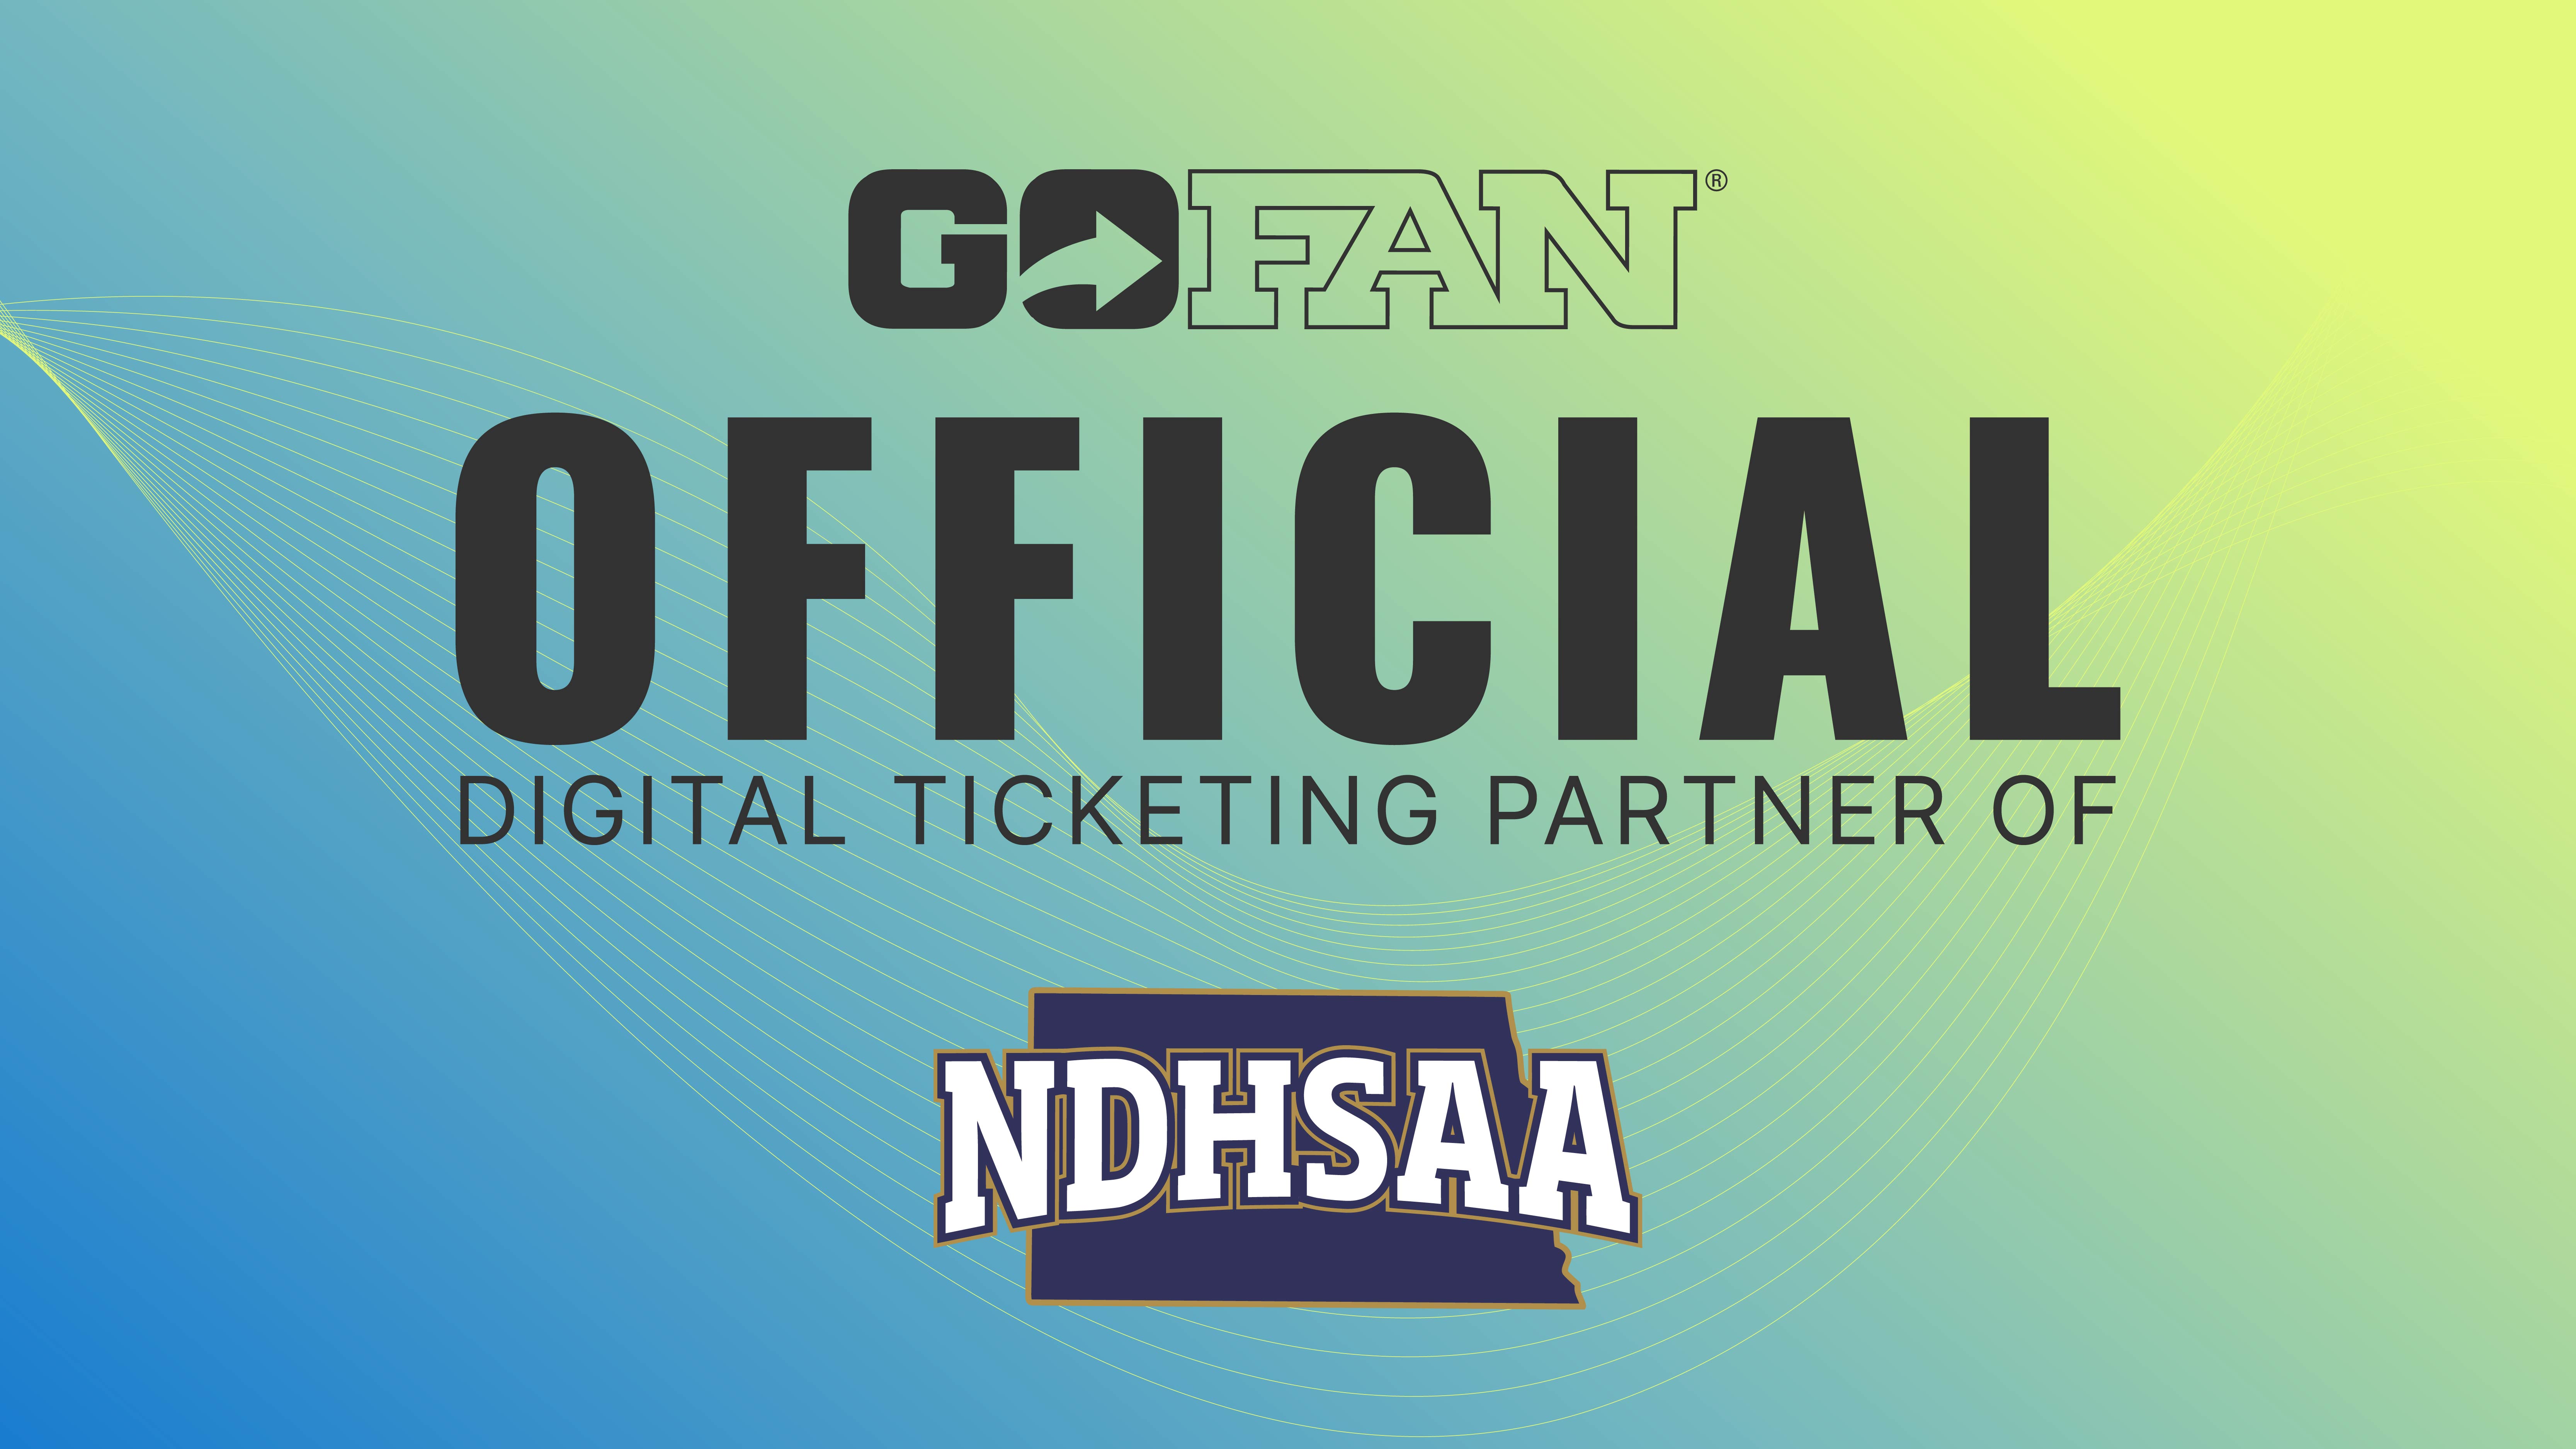 GoFan officially partners with the NDHSAA